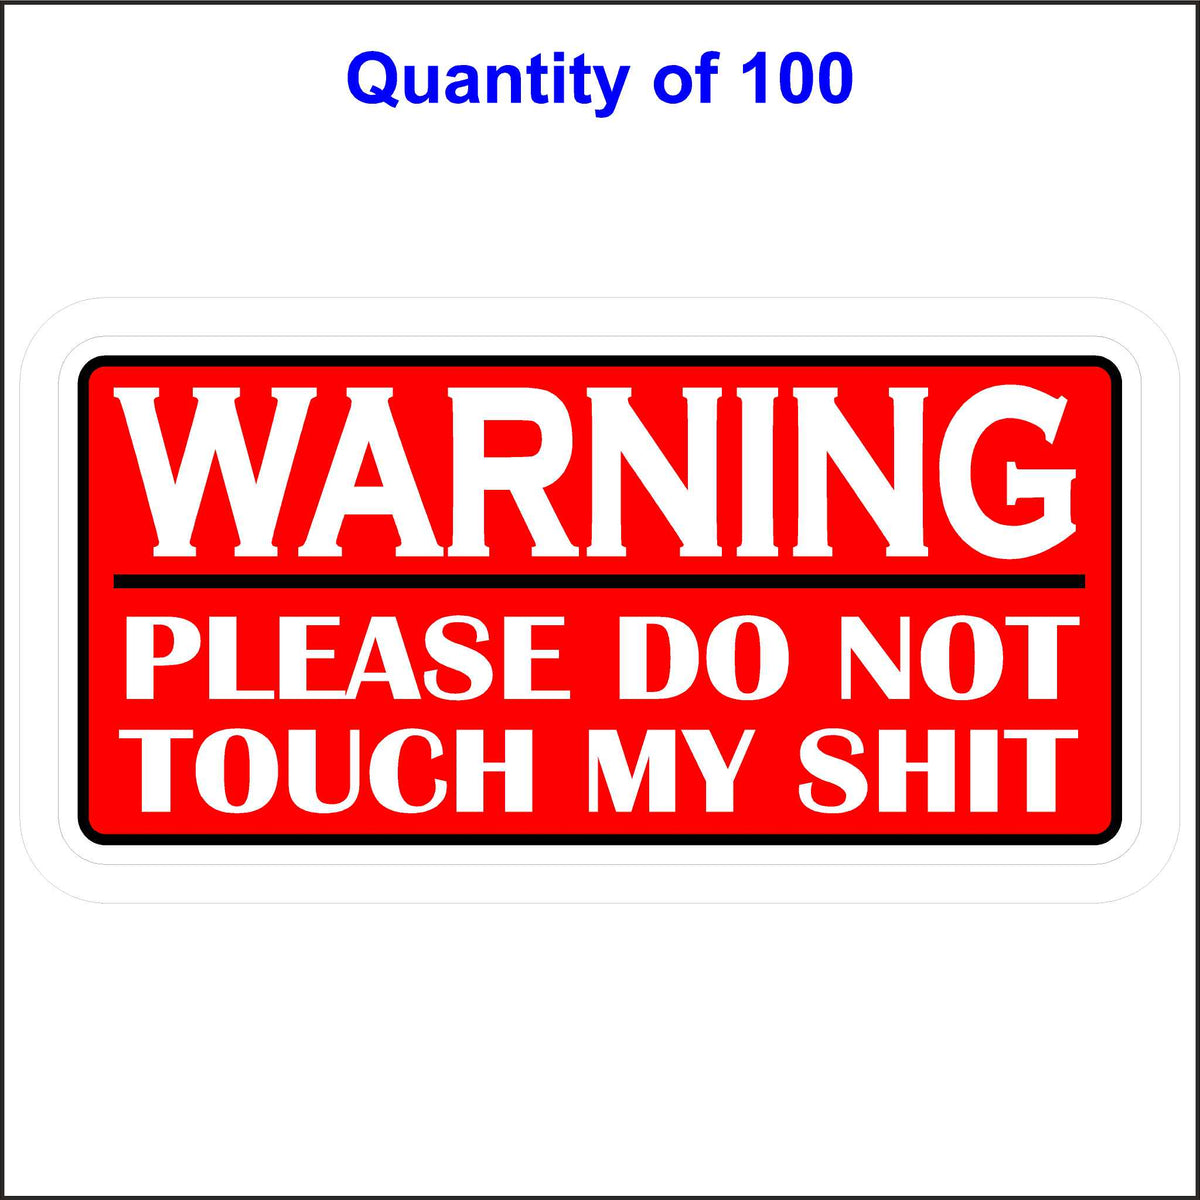 Warning Please Do Not Touch My Shit Sticker With a Red Background and White Lettering. 100 Quantity.